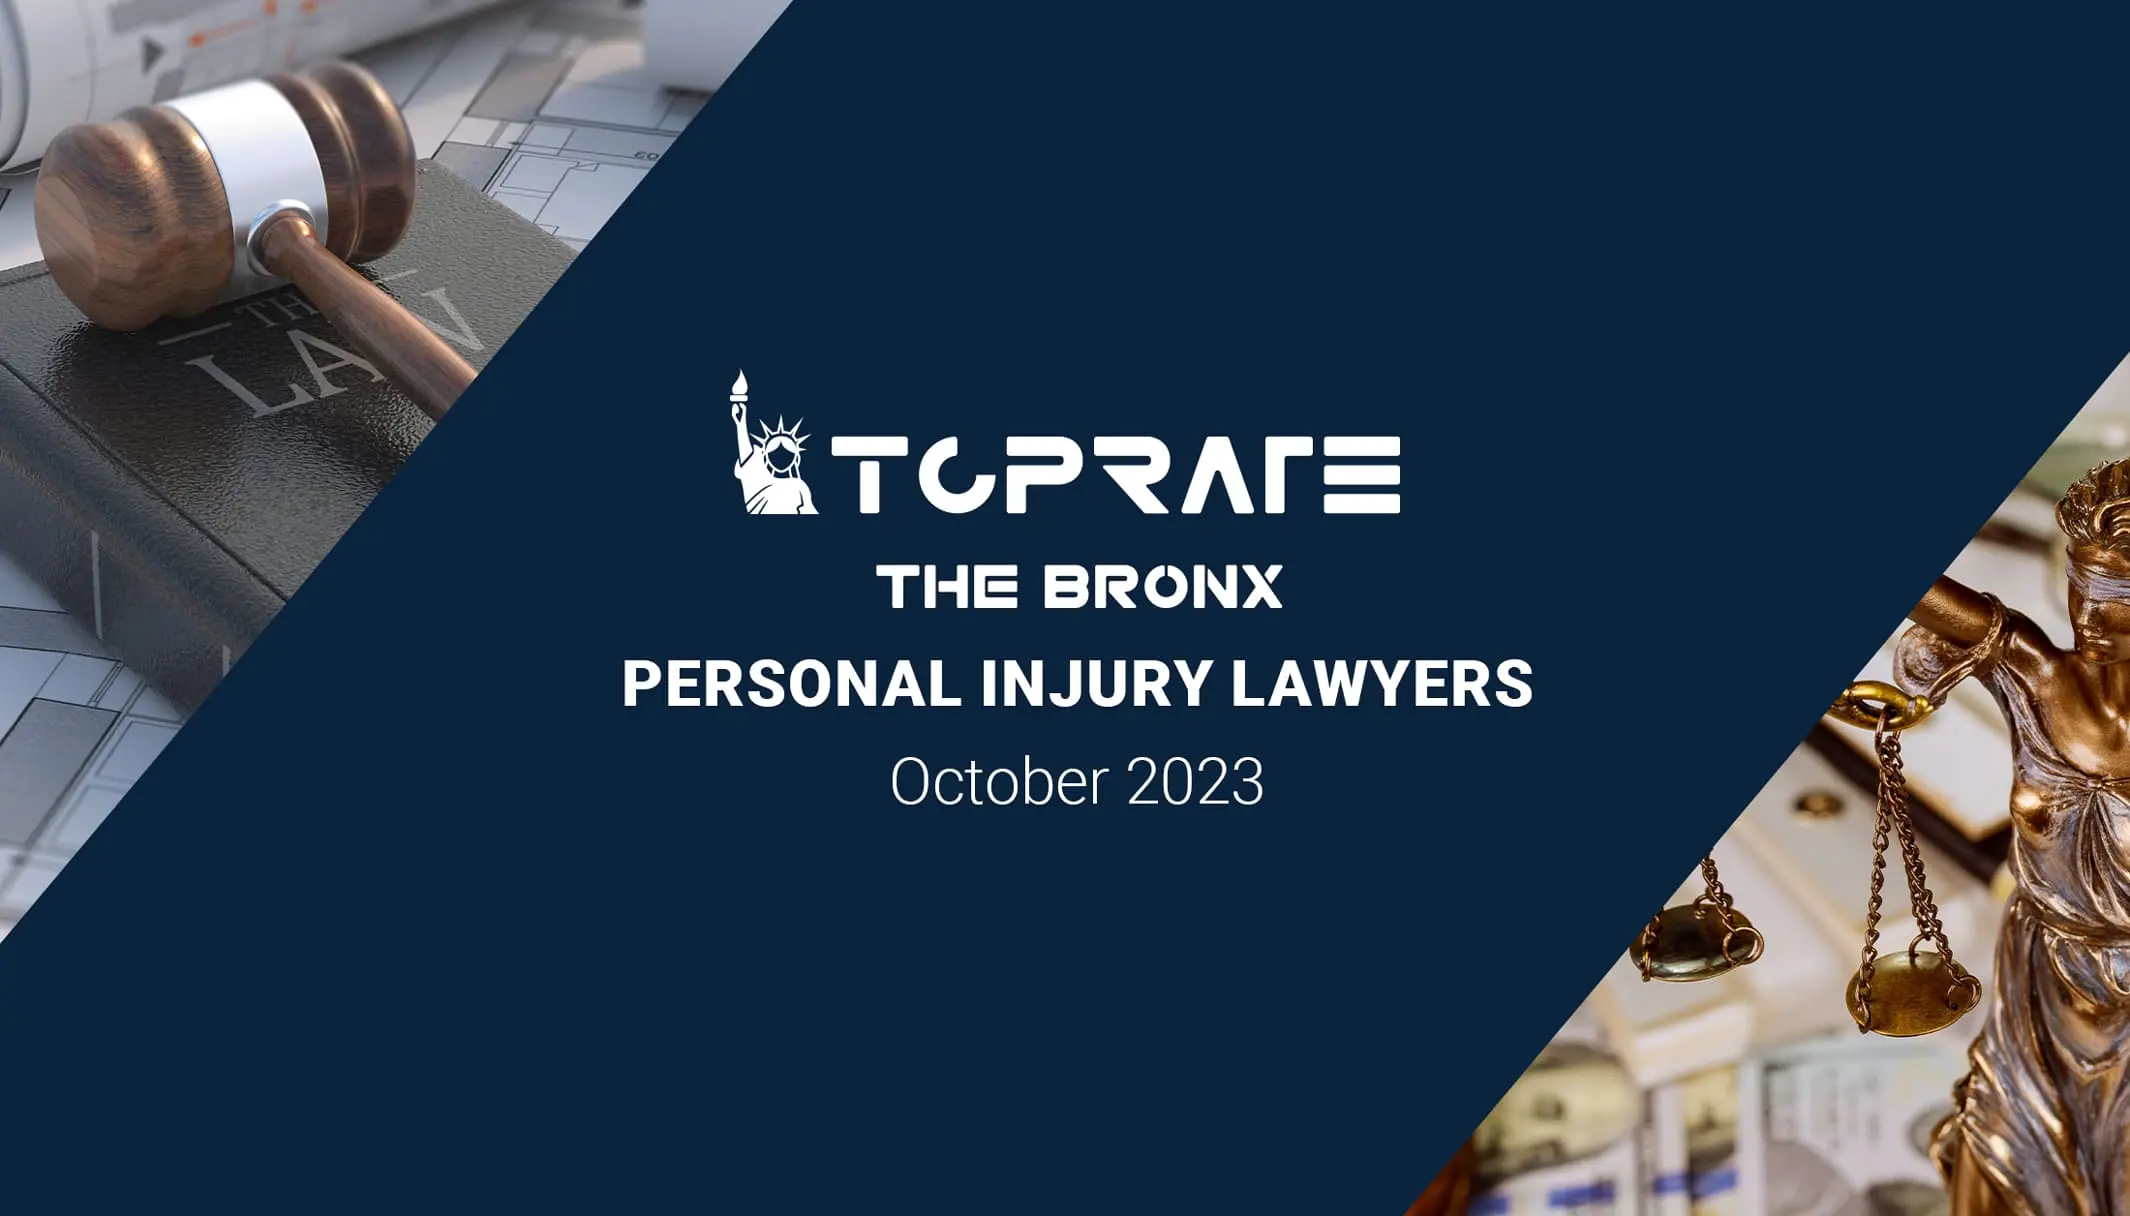 Banner showcasing top 8 personal injury lawyers in Bronx for October 2023